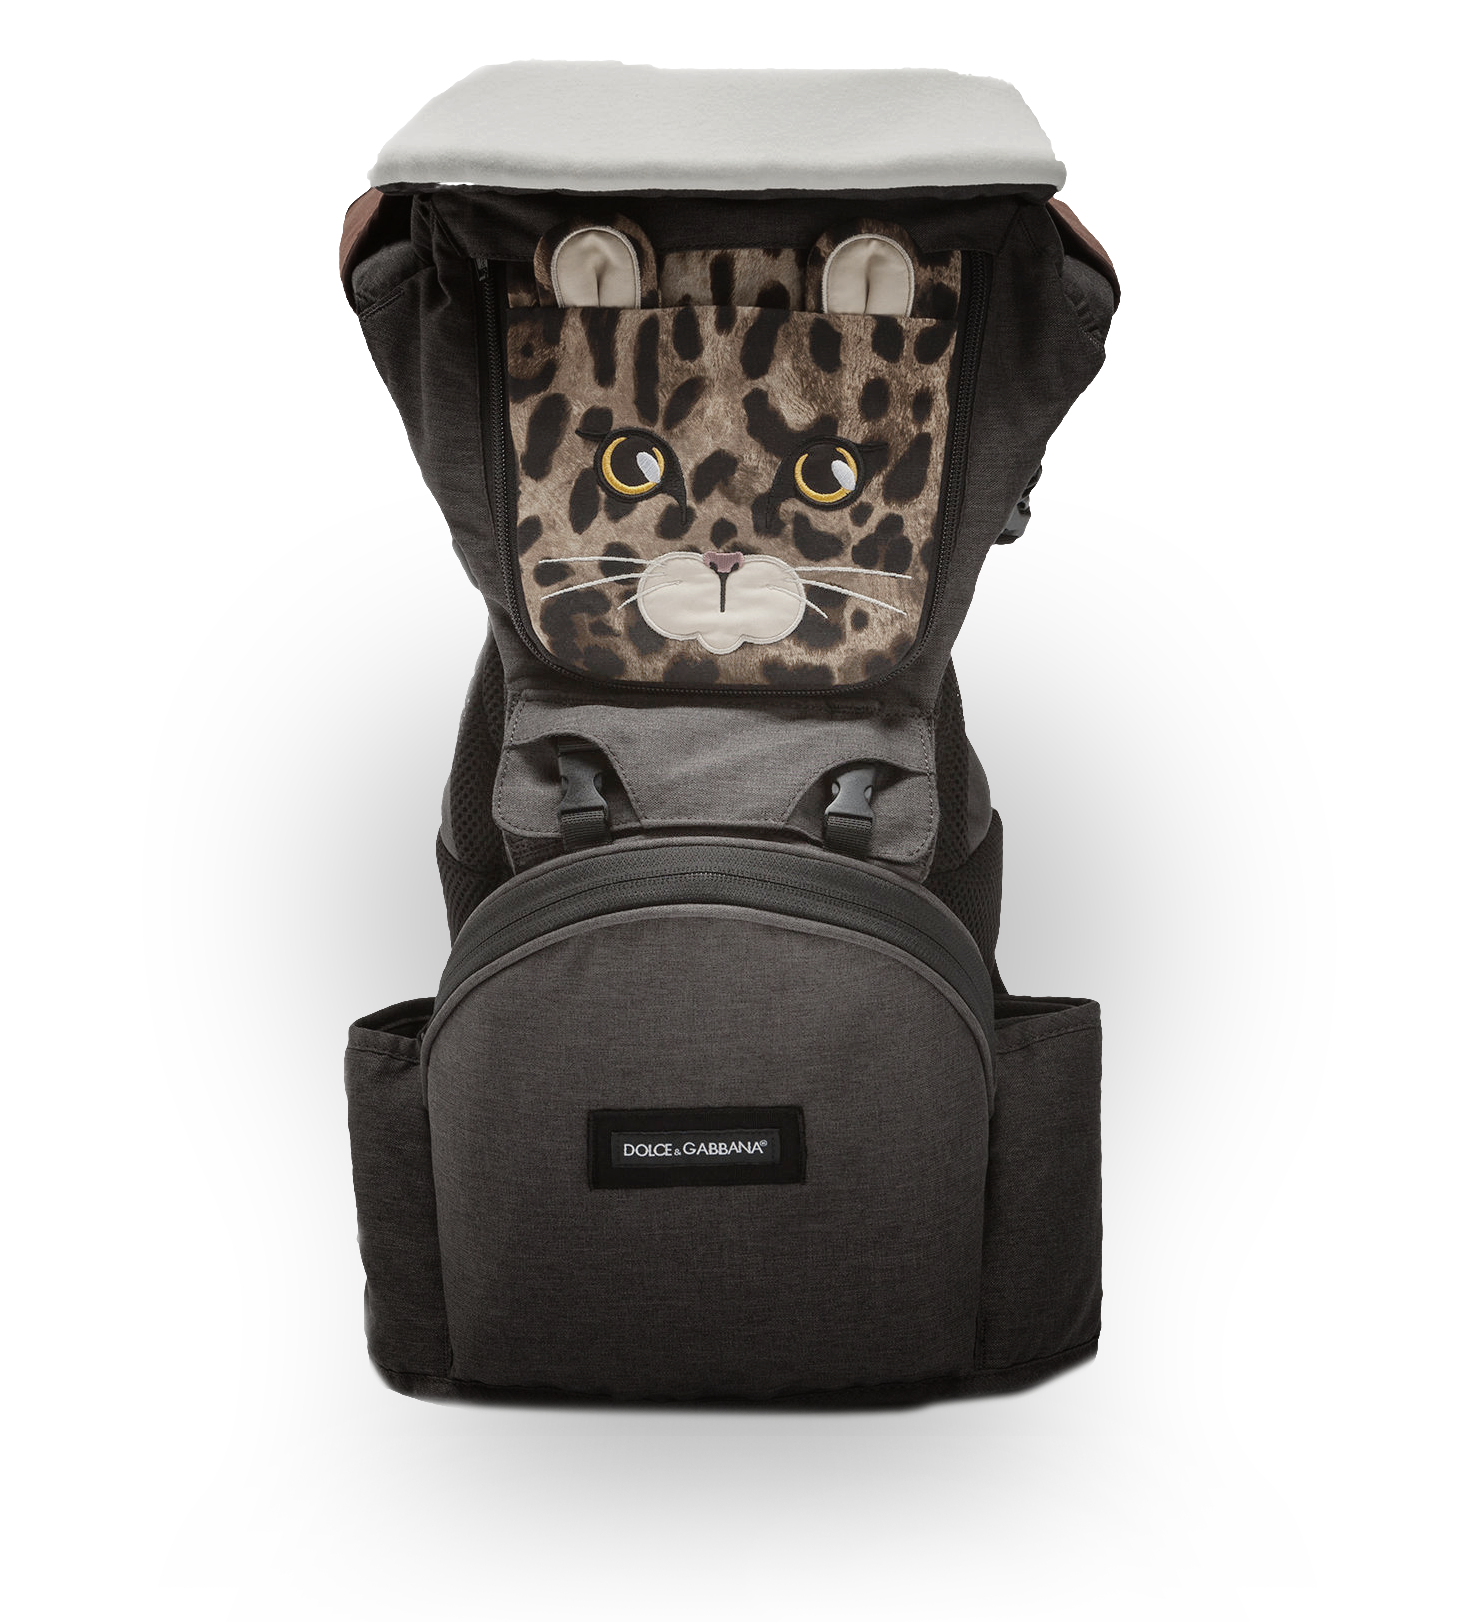 Dolce & Gabbana Baby Carrier By MiaMily – Miamily